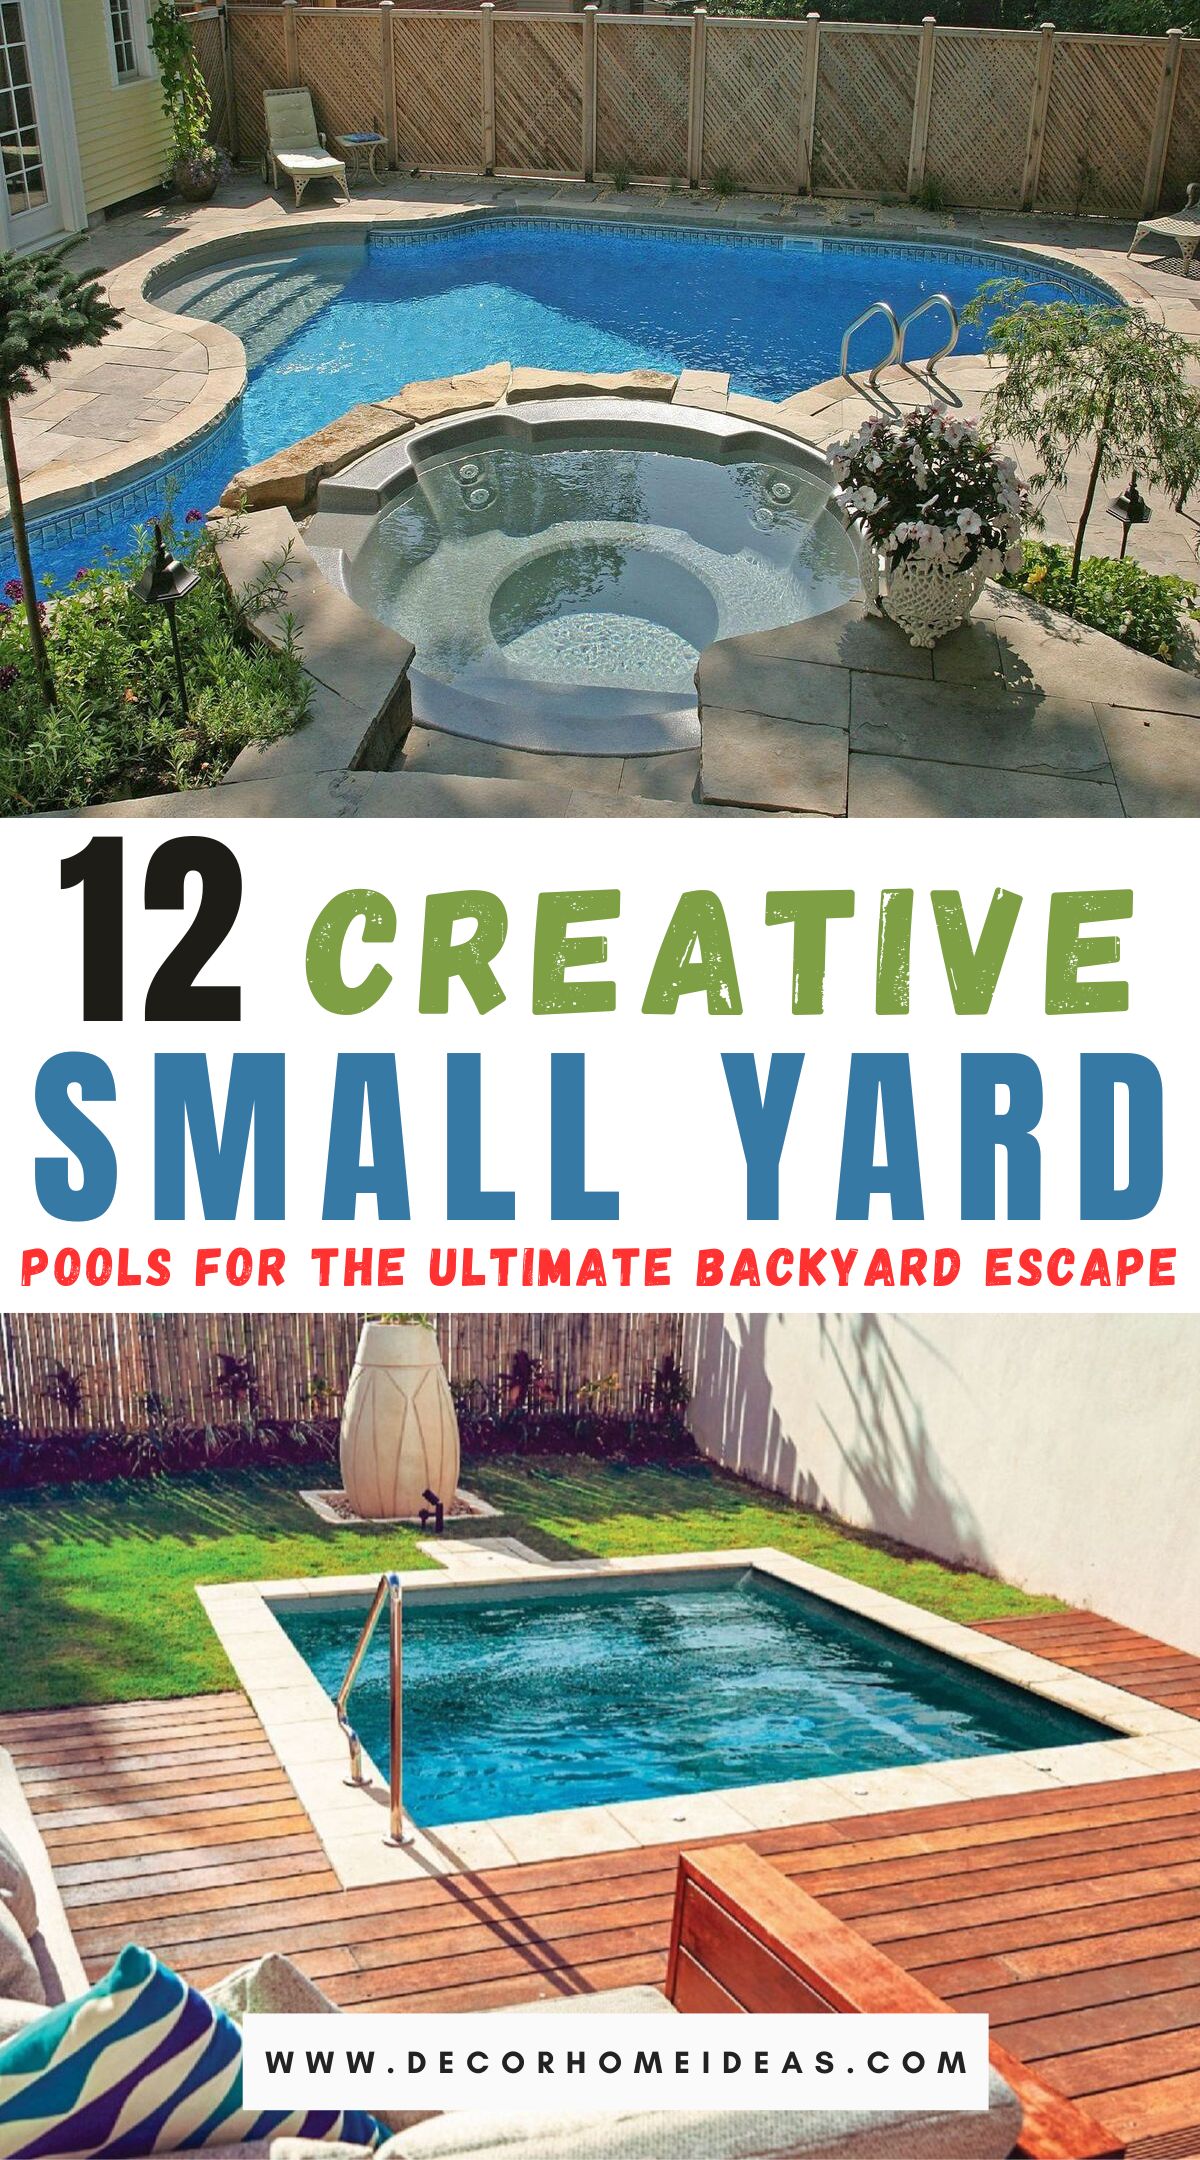 Best Pool Design Ideas For Small Yards